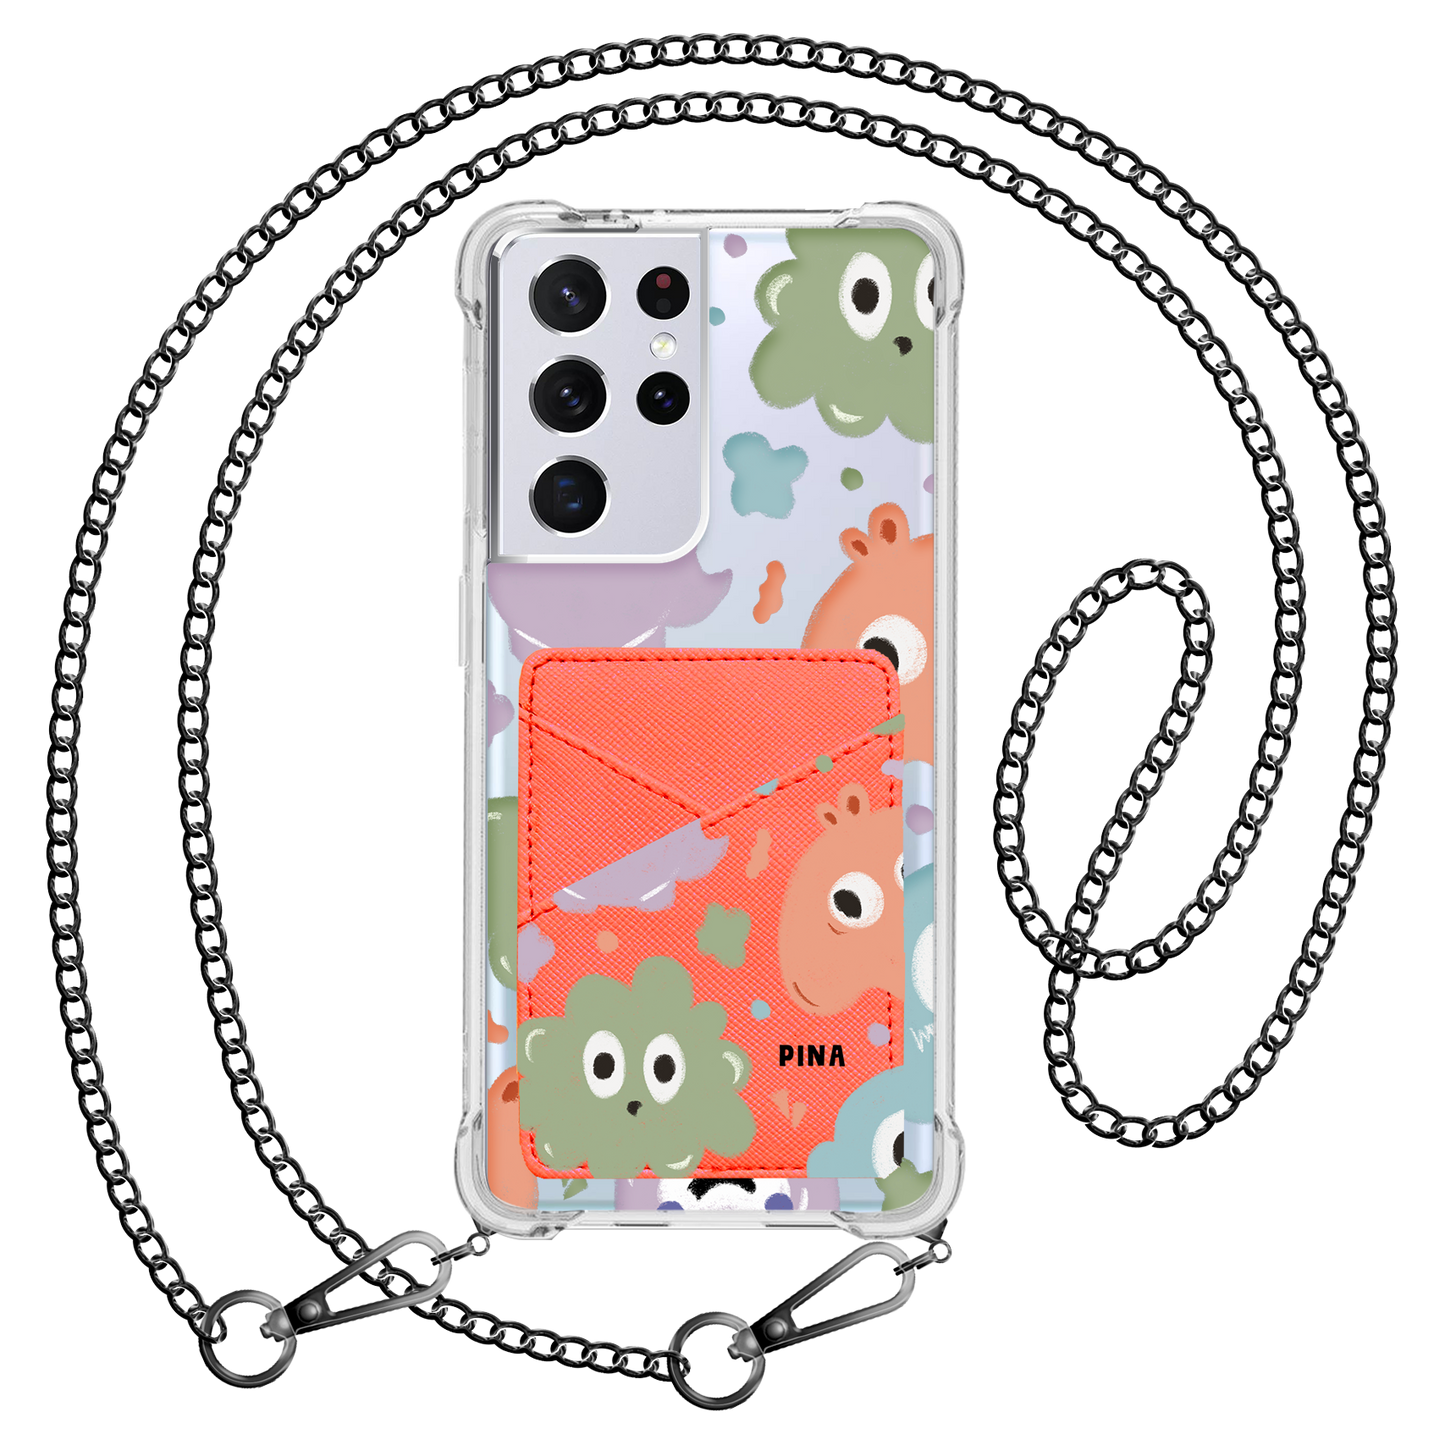 Android Phone Wallet Case - Cute Monster 2.0